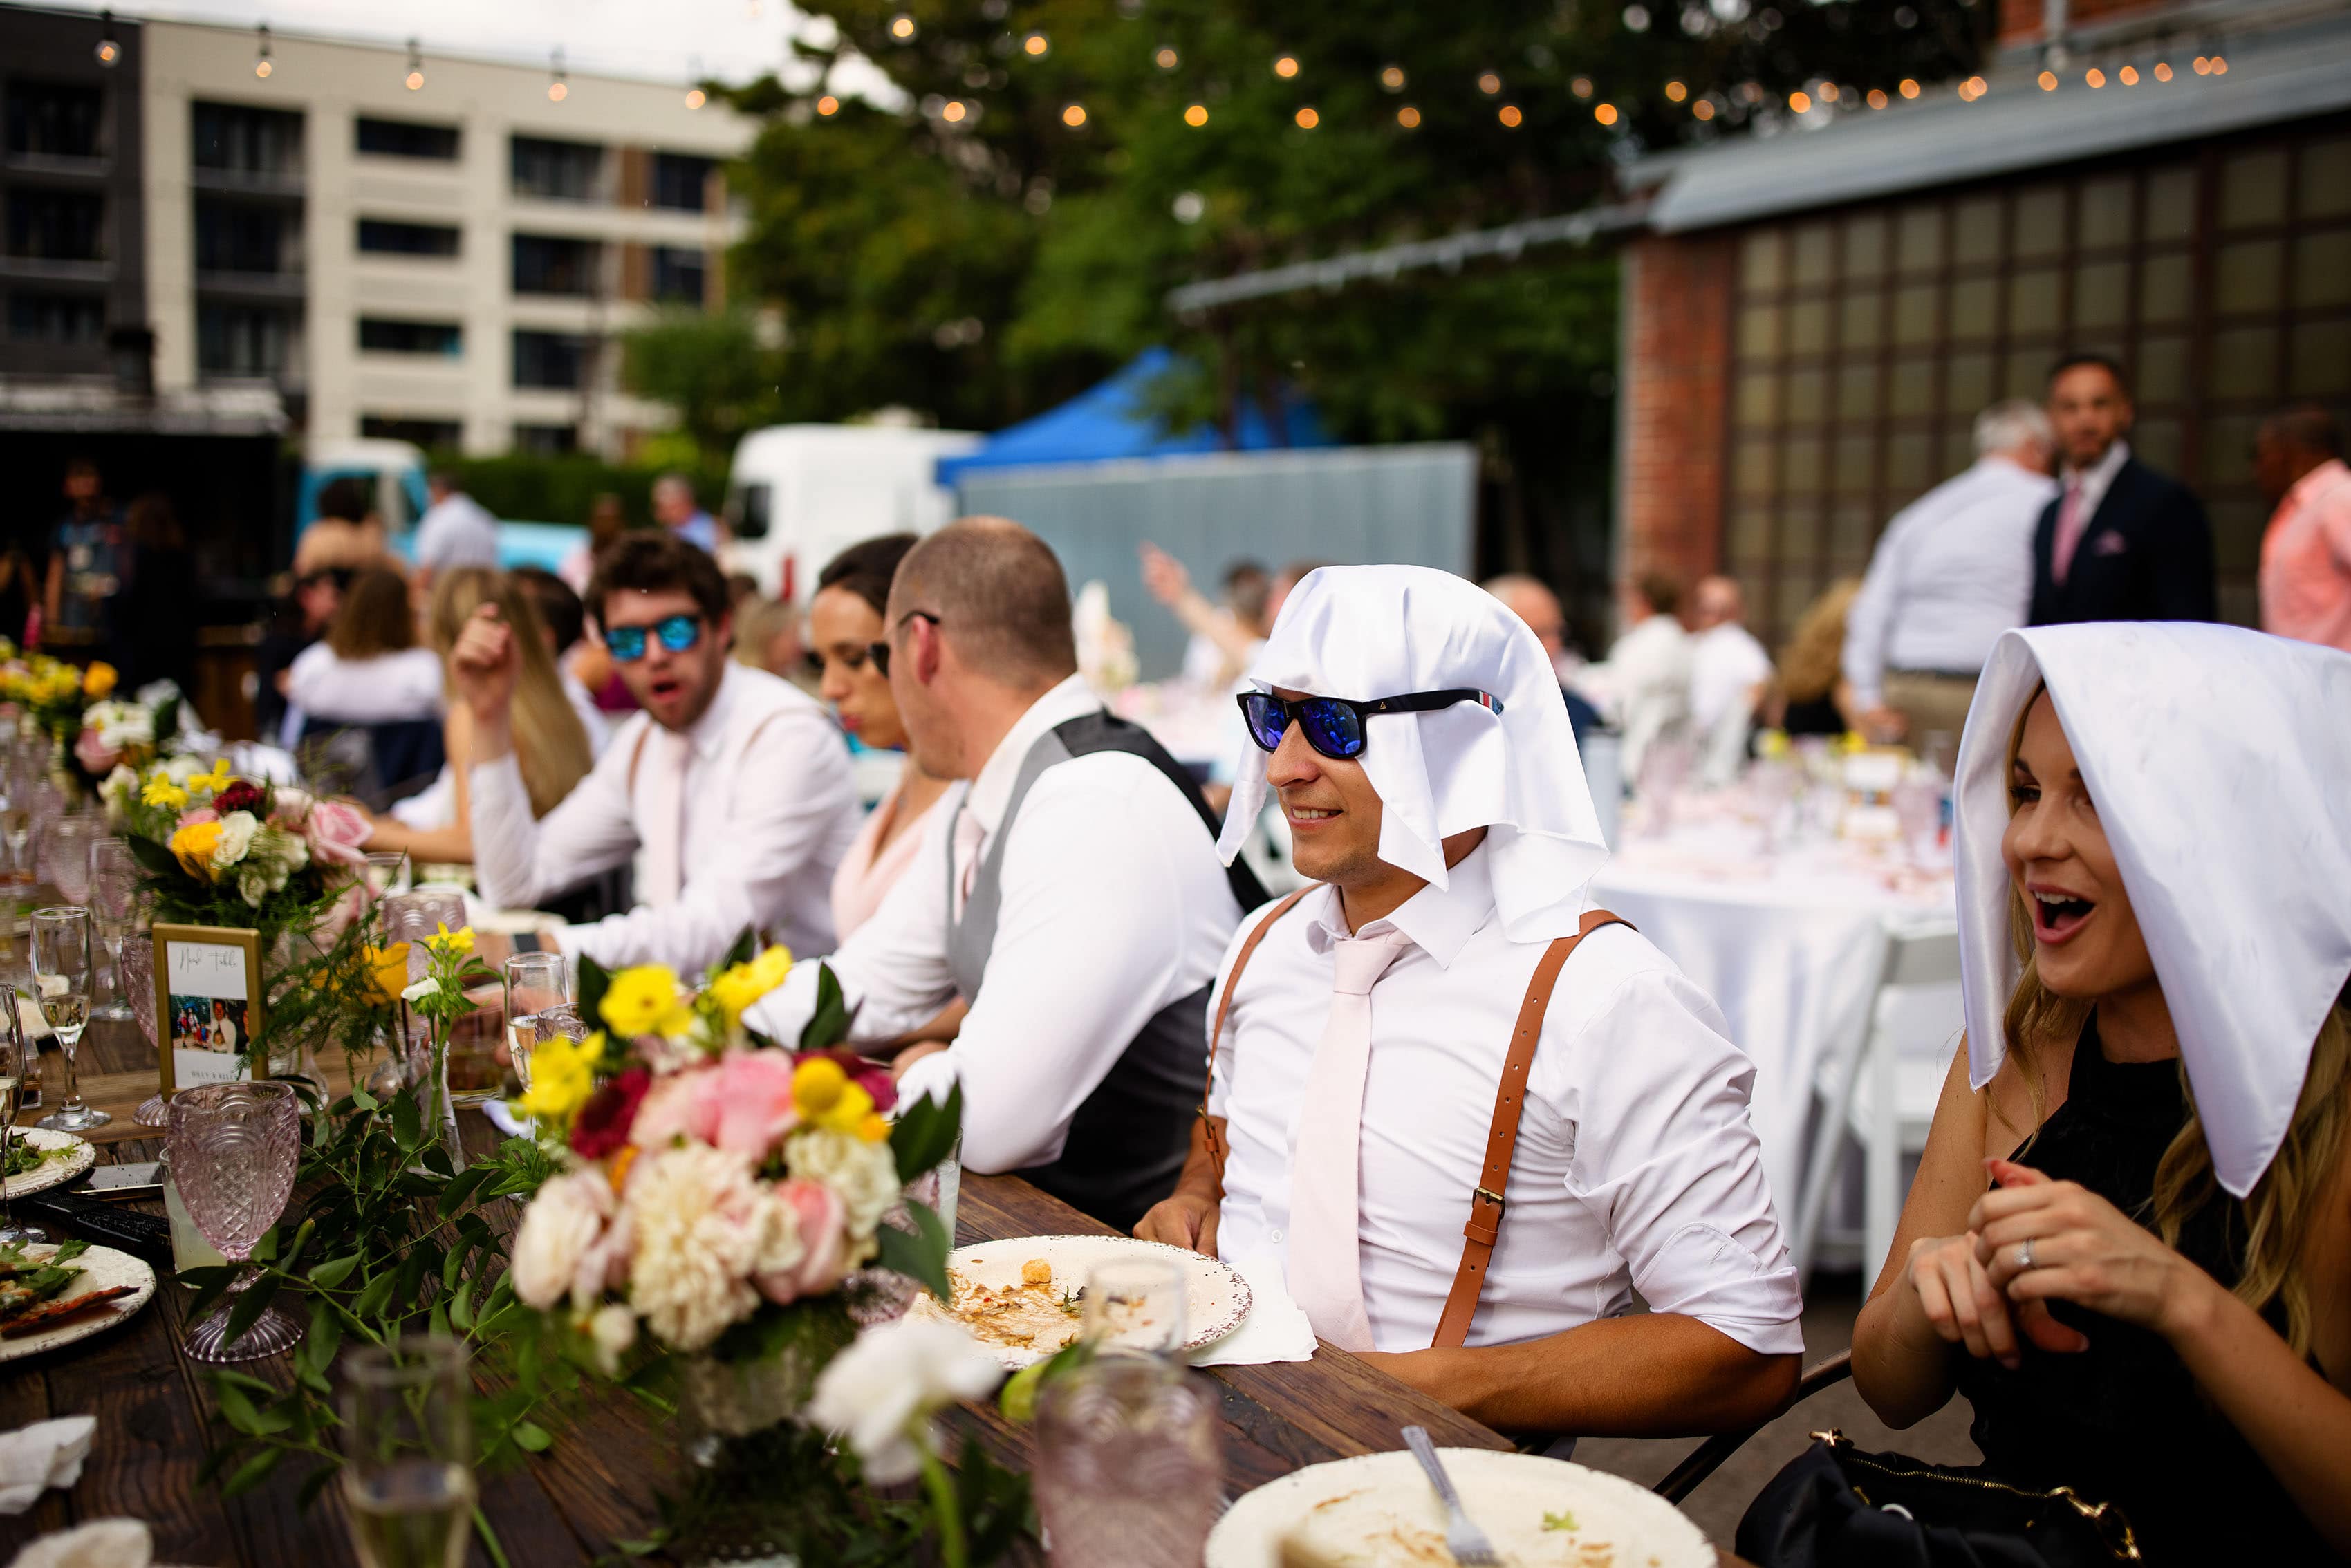 Guests use napkins to shade themselves during dinner